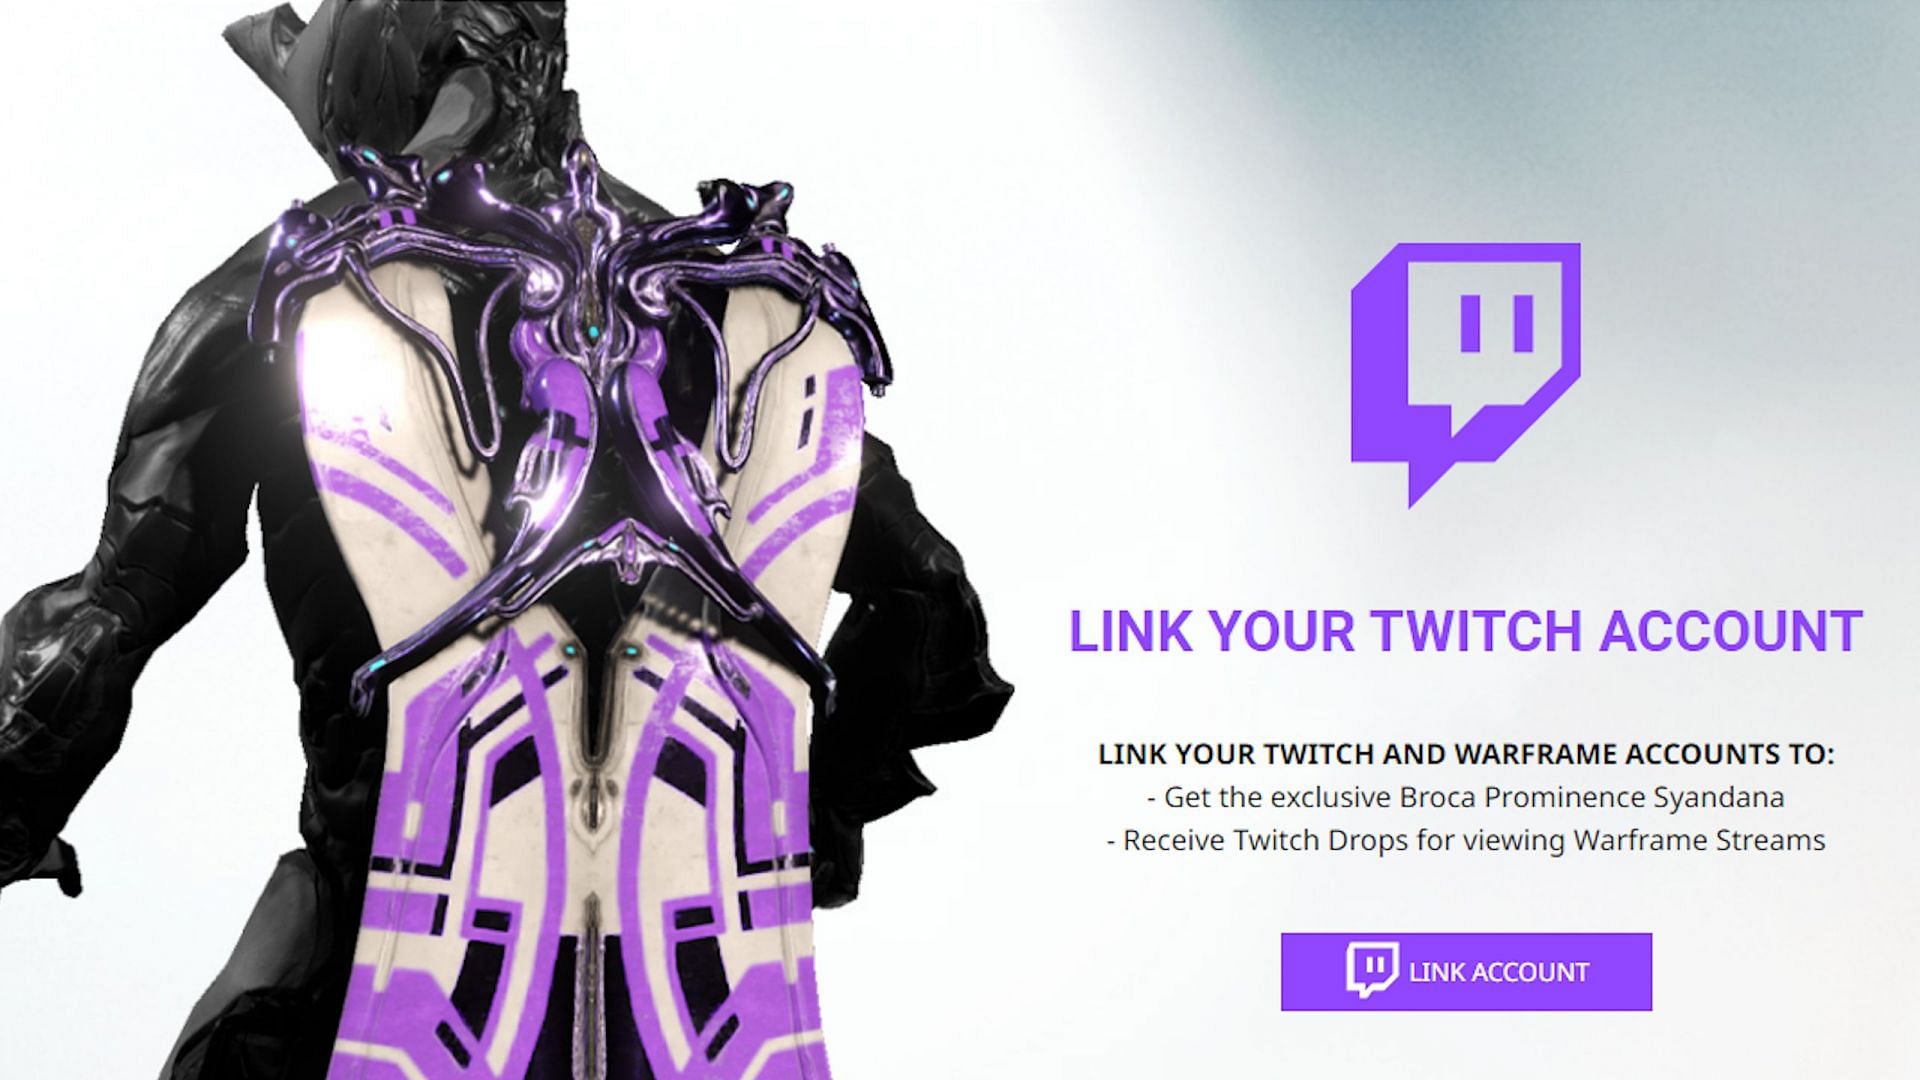 You can claim rewards by linking your Twitch with the in-game account (Image via Digital Extremes)